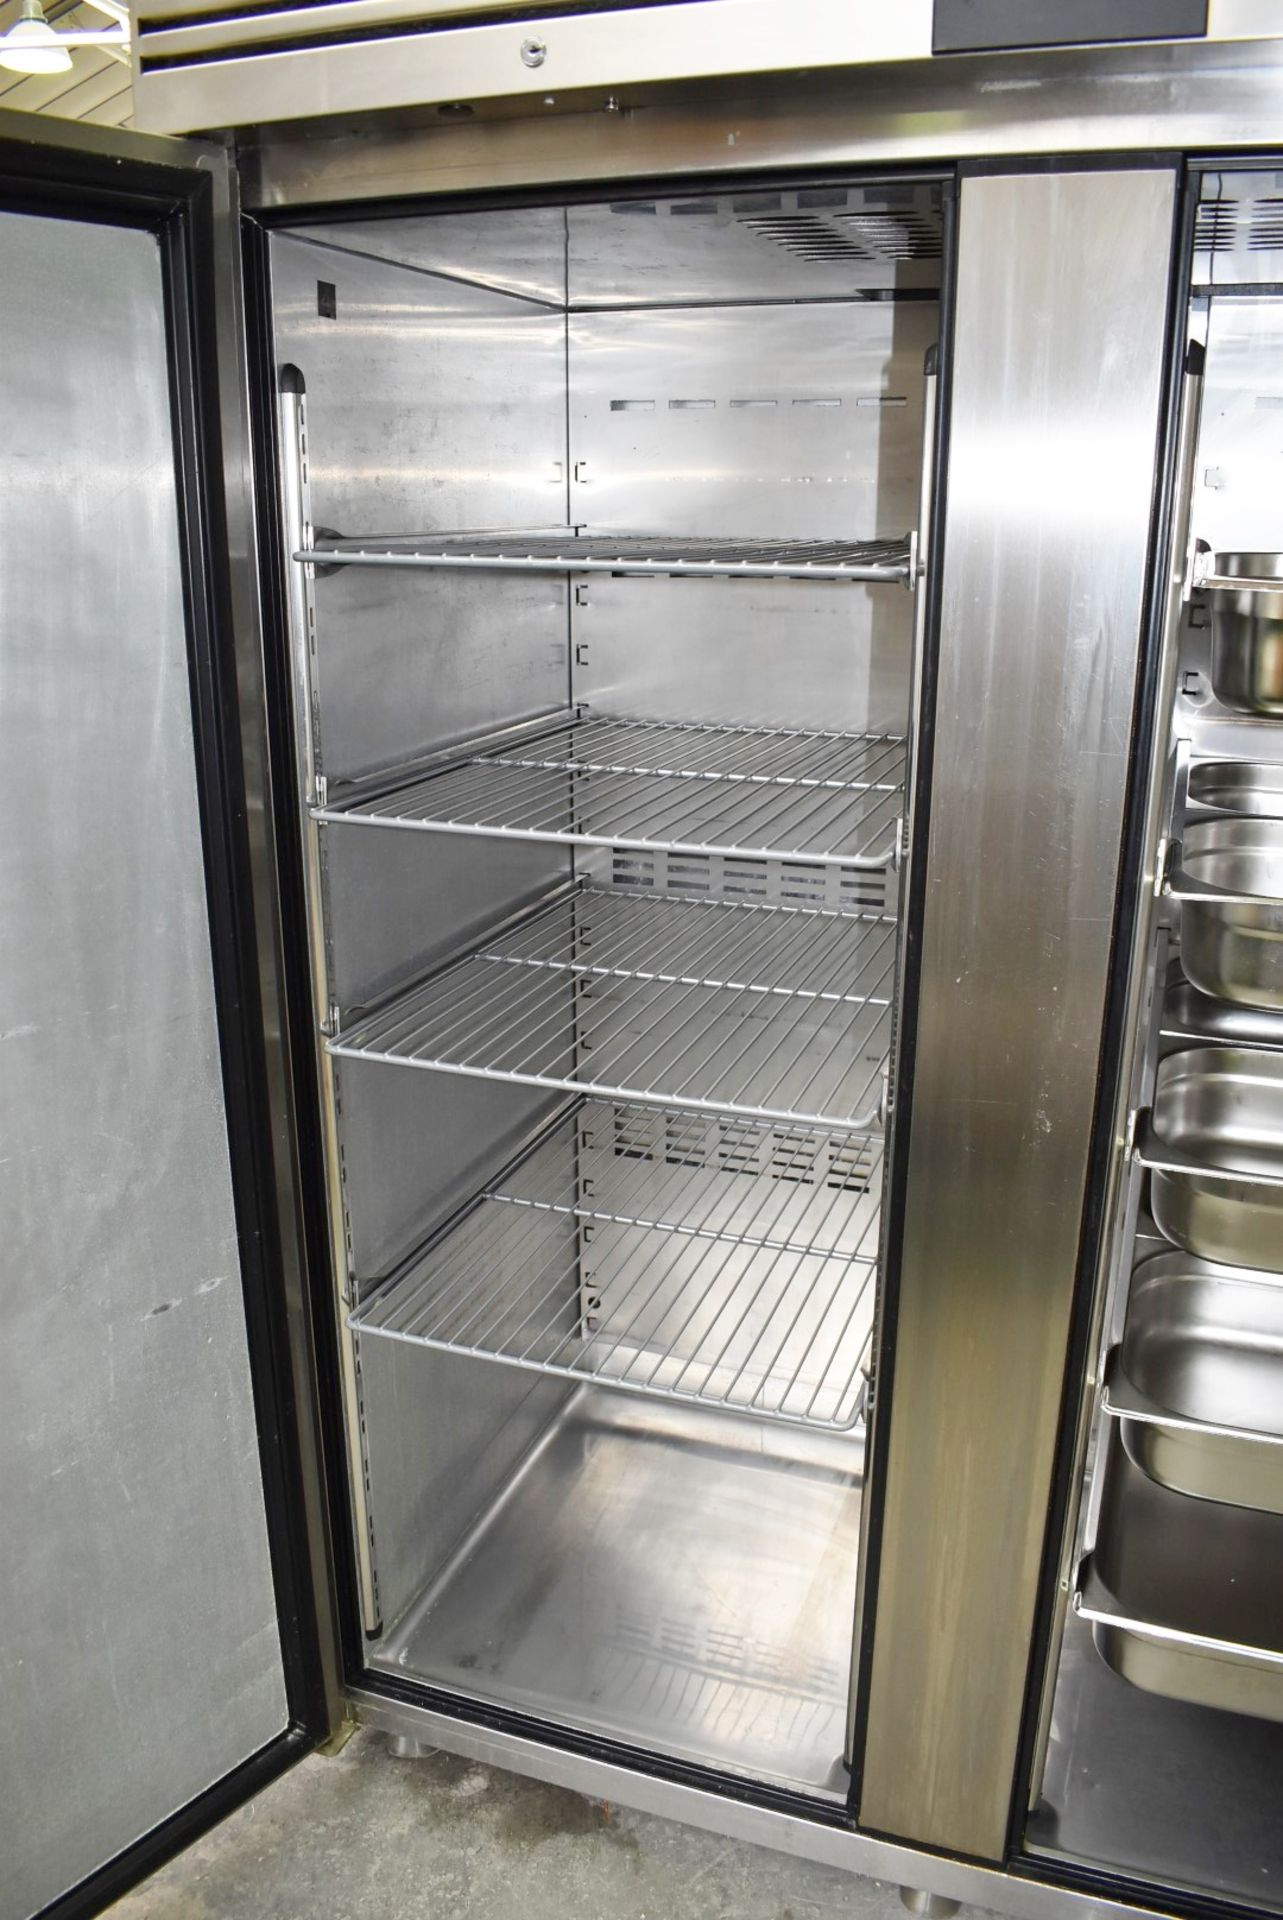 1 x Foster Eco Pro G2 Two Door Upright Meat Fridge - Model EP1440M - 1350 Litre - RRP £4,600 - Image 11 of 22